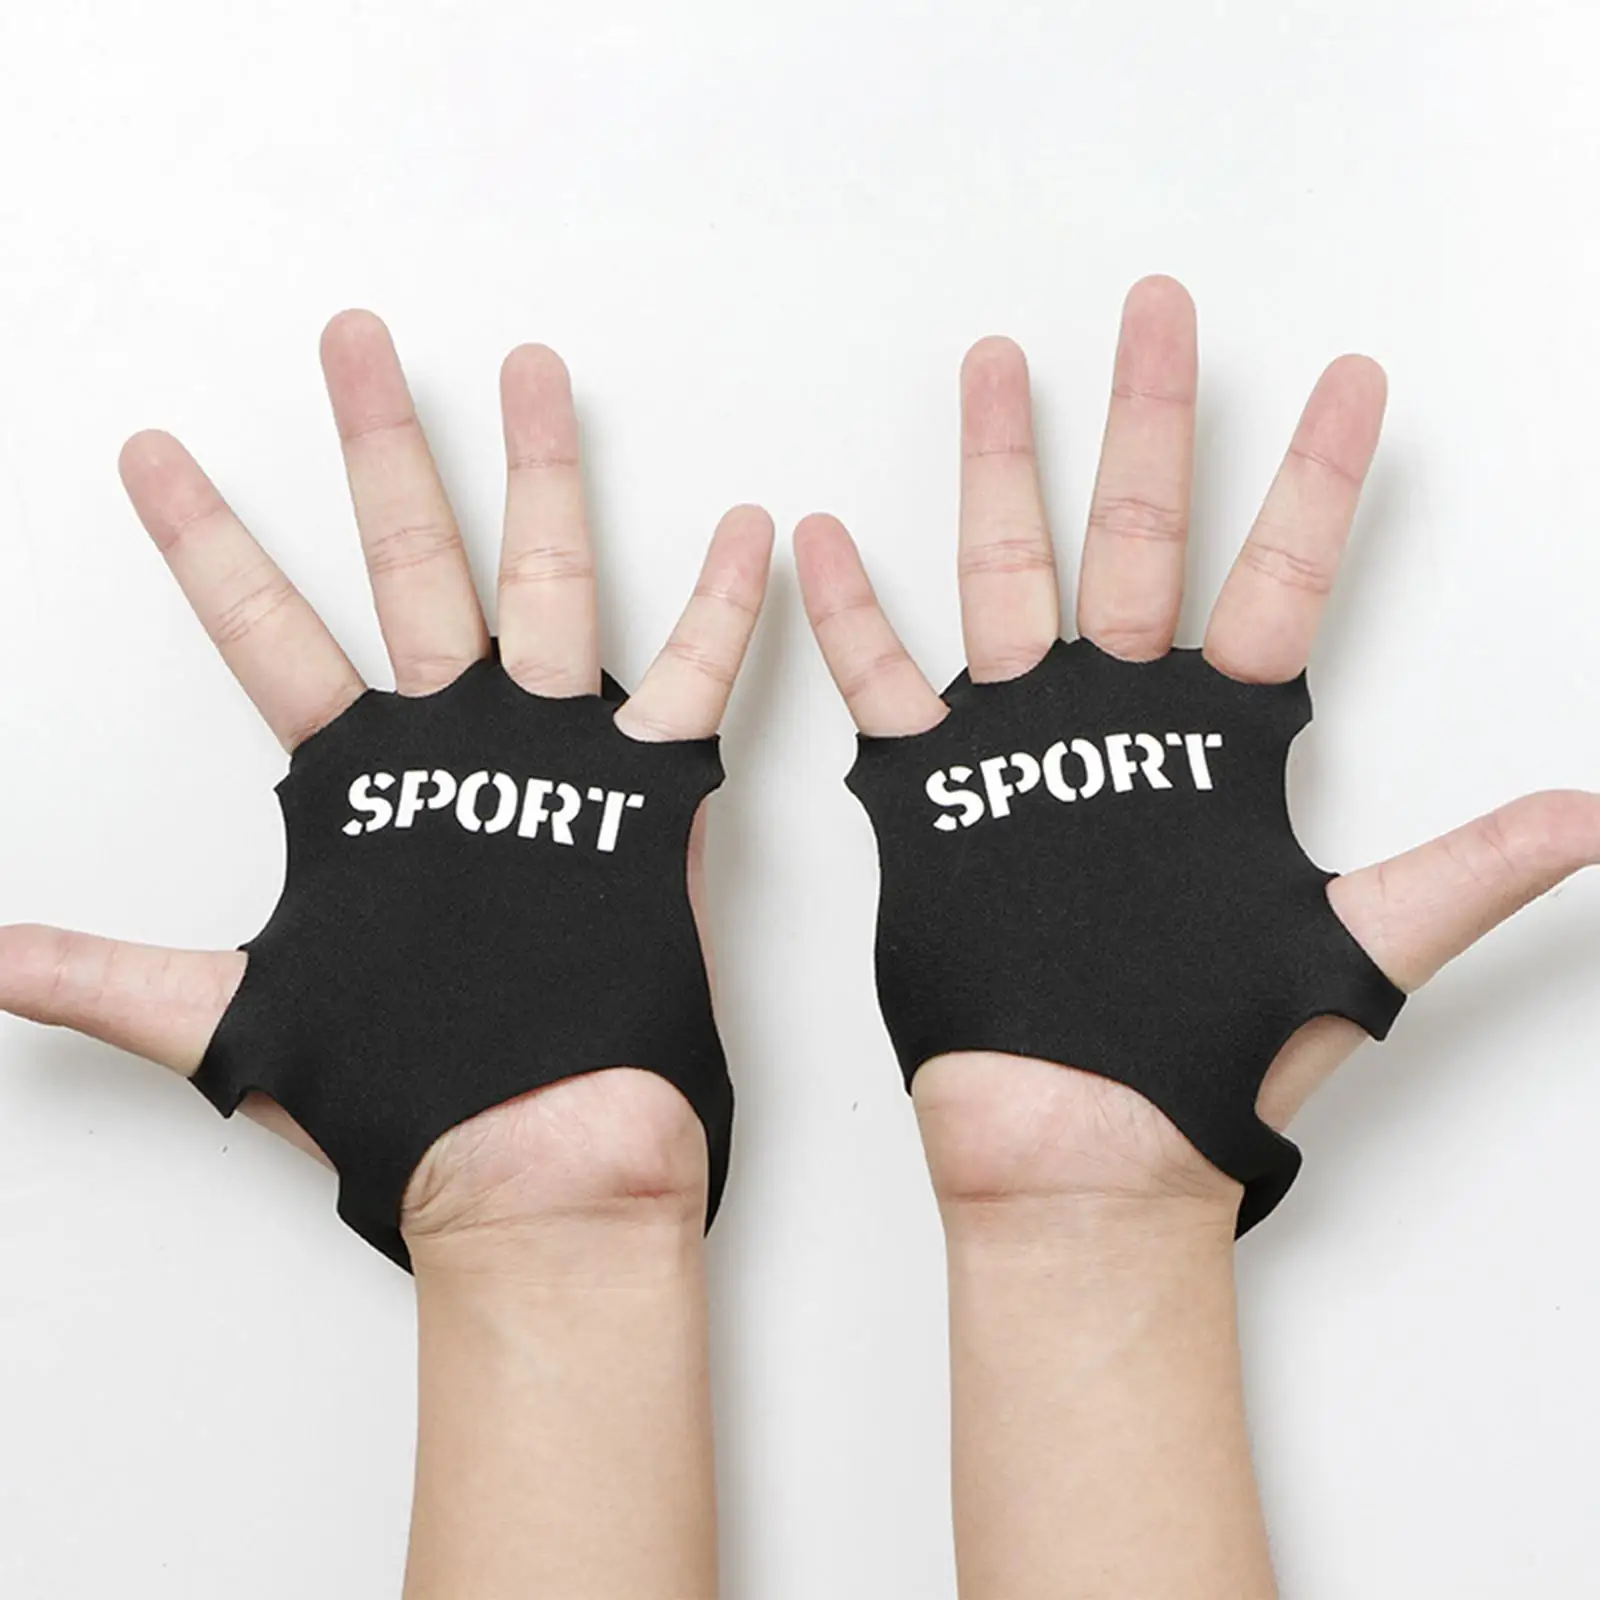 Workout Gloves Hand Grips Full Palm Protection Durable Rubber Pads Weight Lifting Gloves for Men Women Gym Cycling Calisthenics